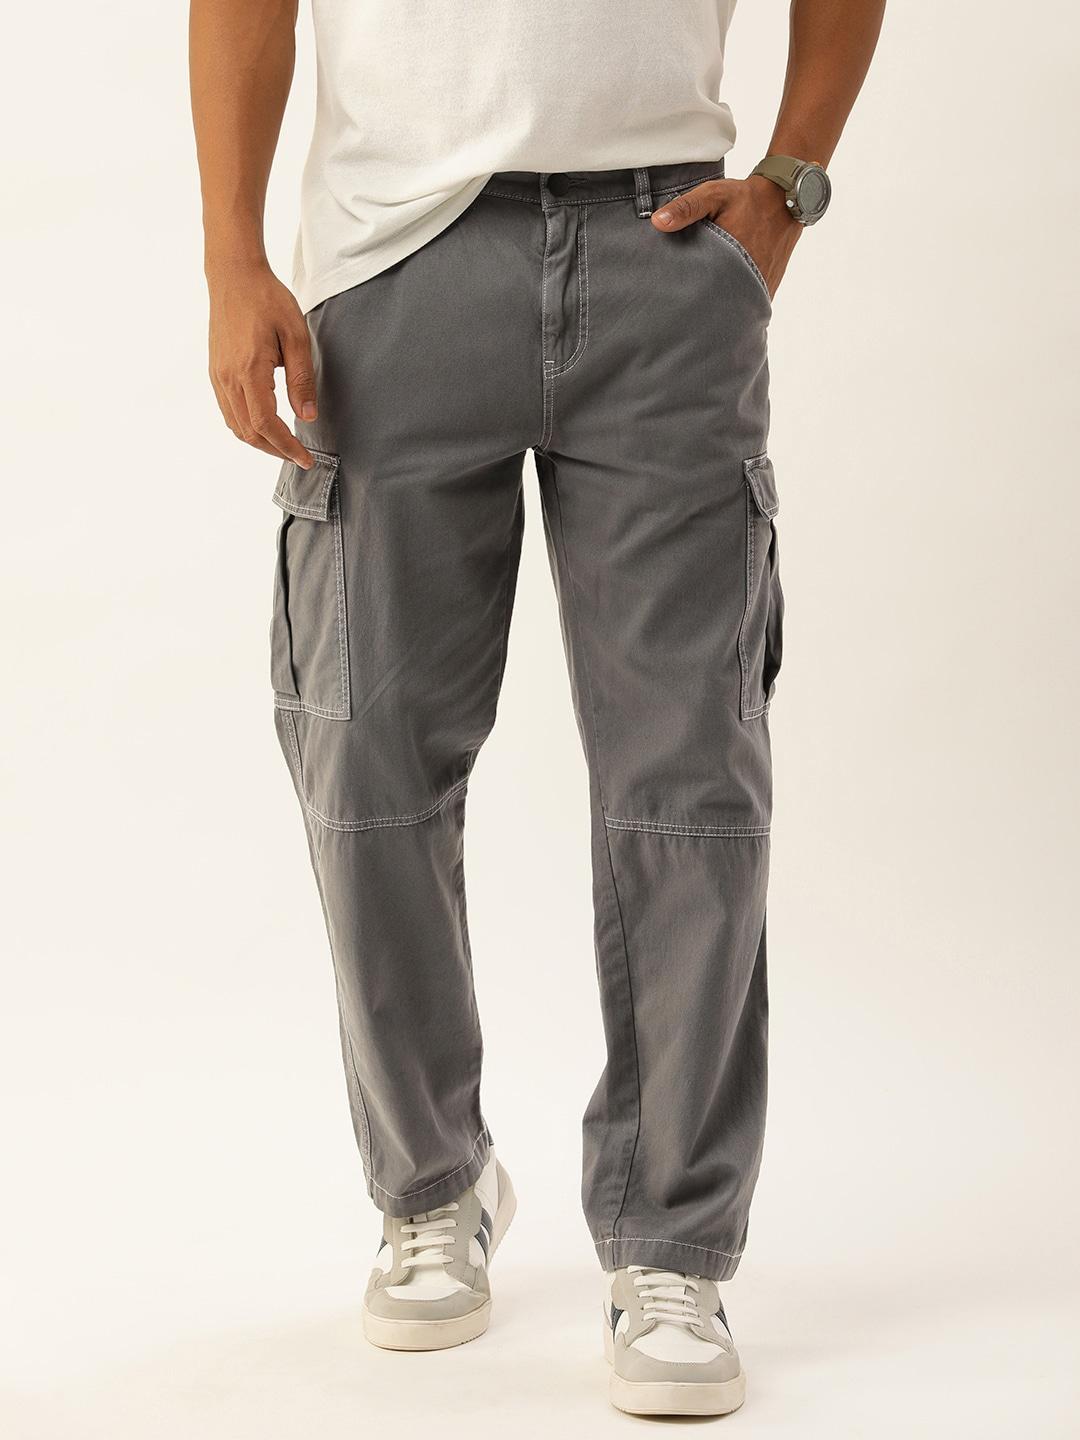 Bene Kleed Men Relaxed Fit Cotton Cargos Trousers with Contrast stitch